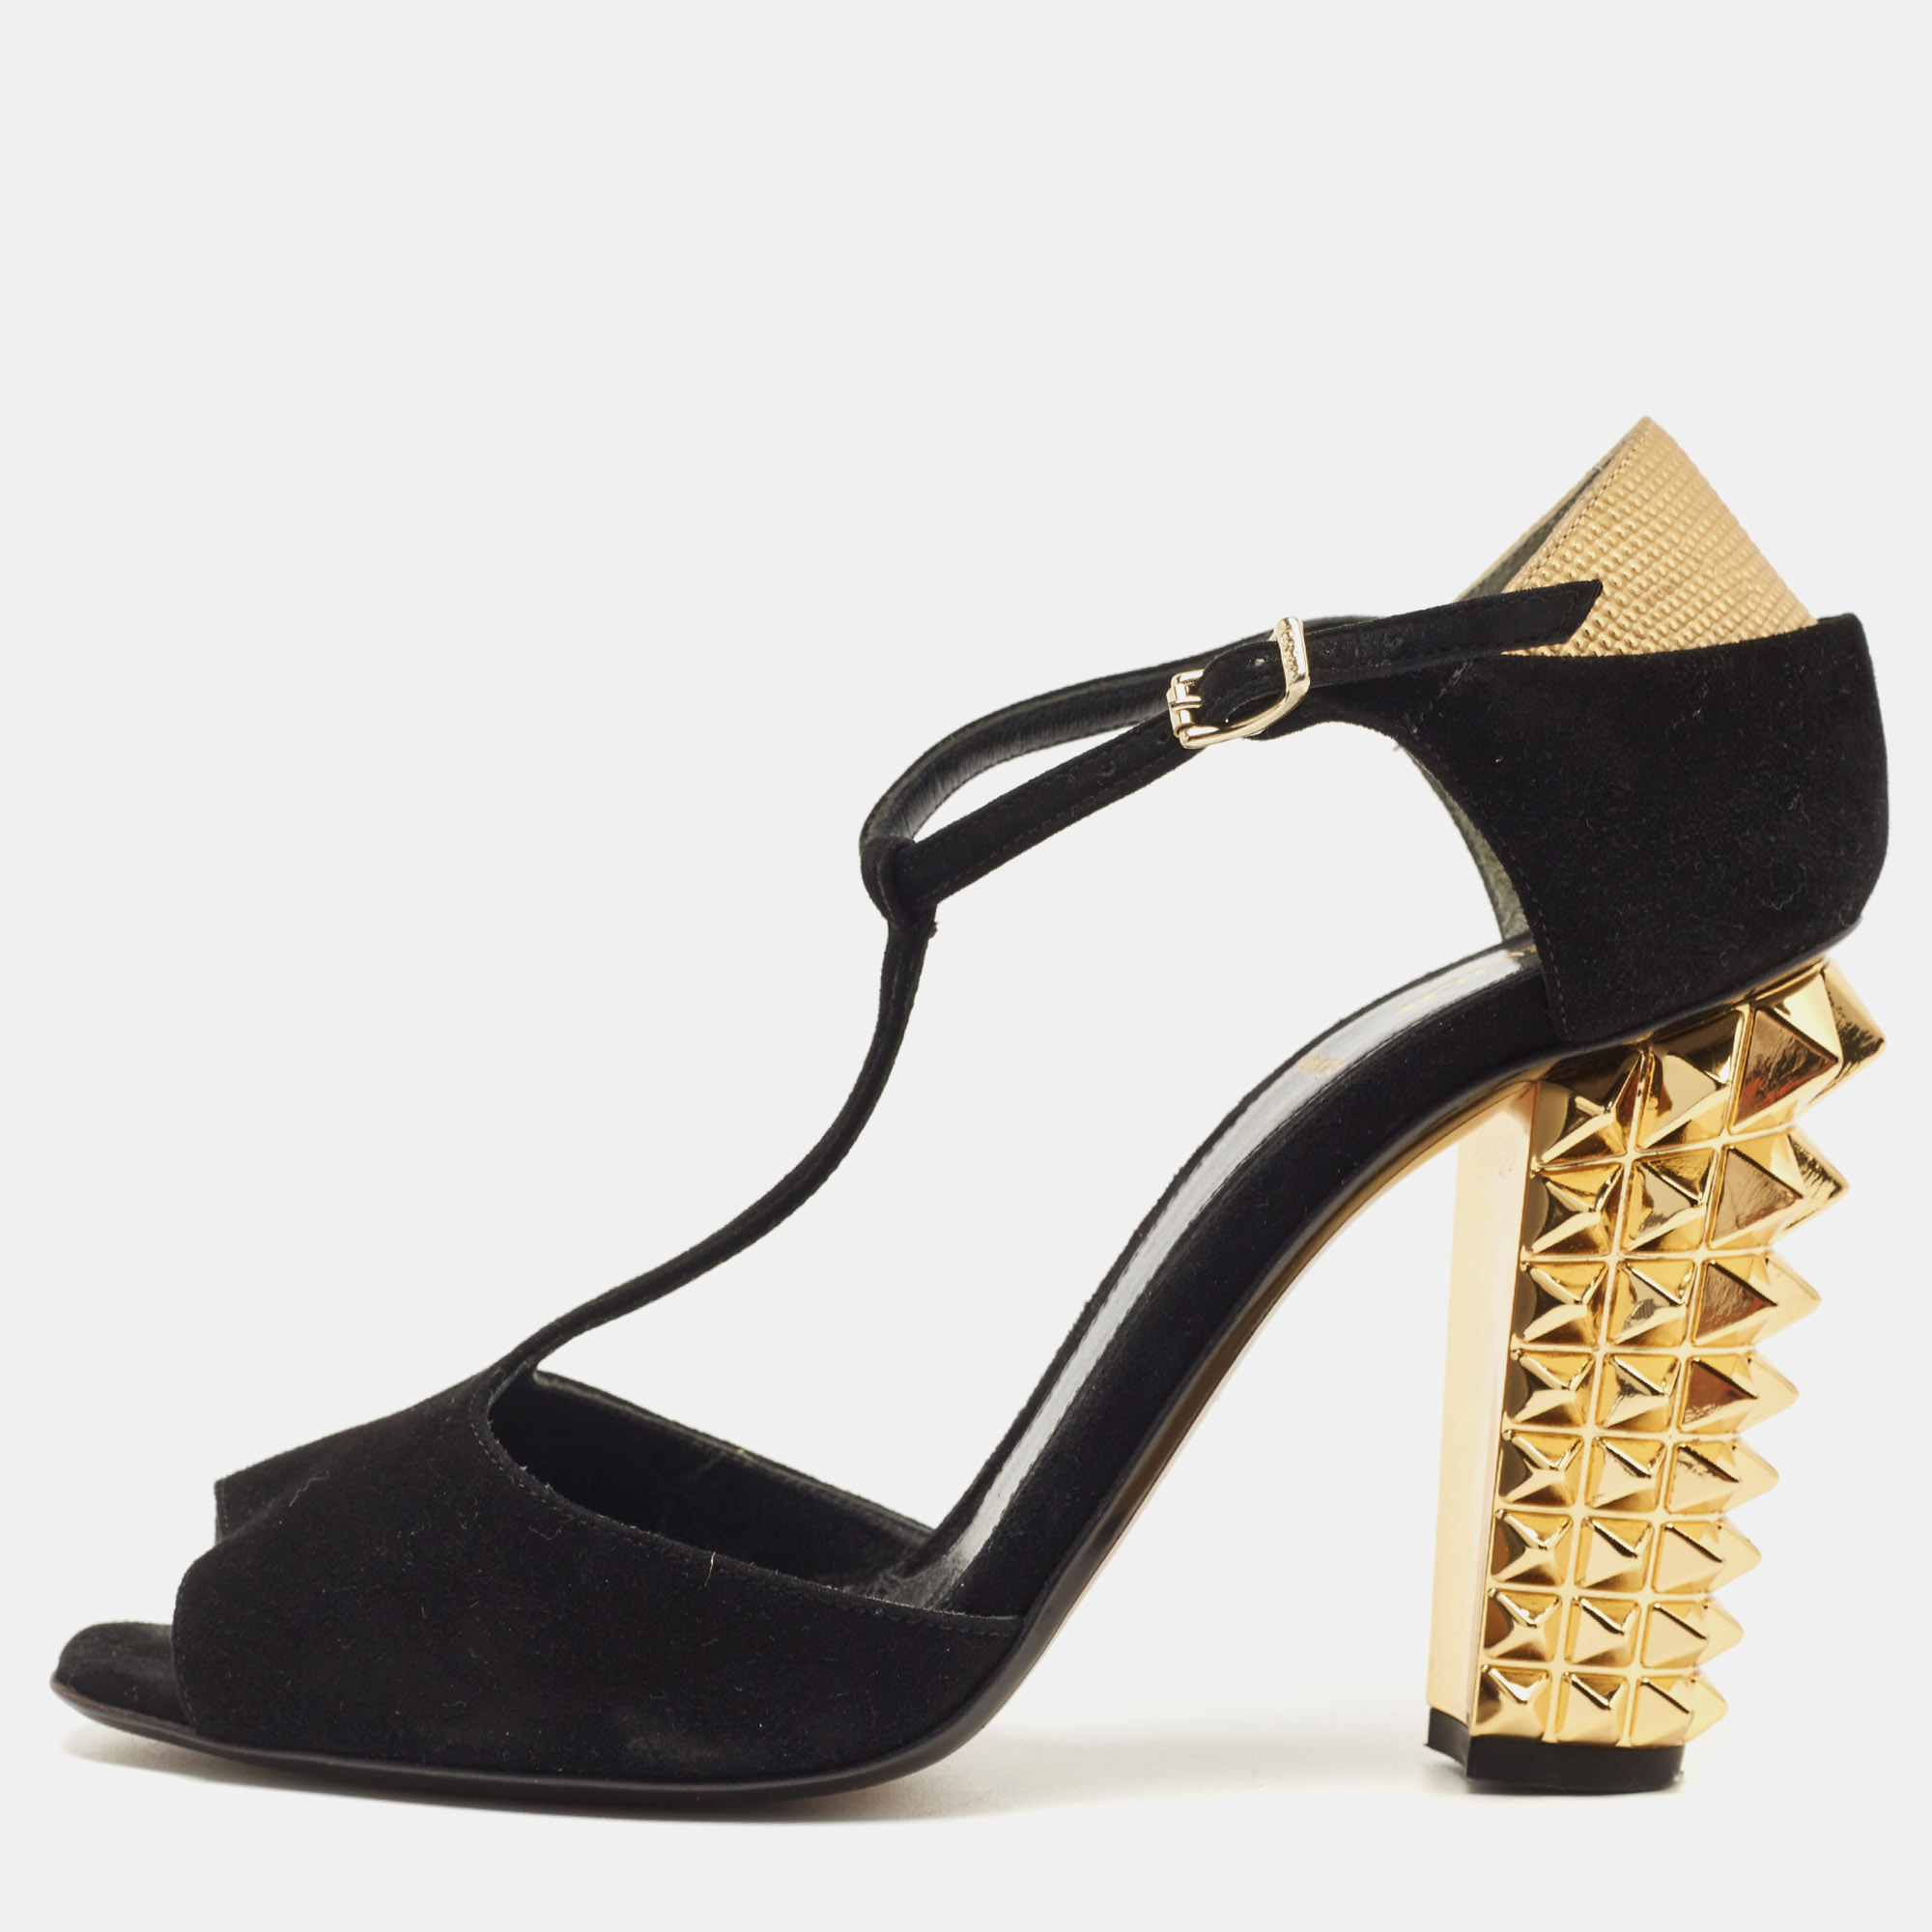 Fendi black/gold suede and embossed leather studded heel t-strap sandals size 38